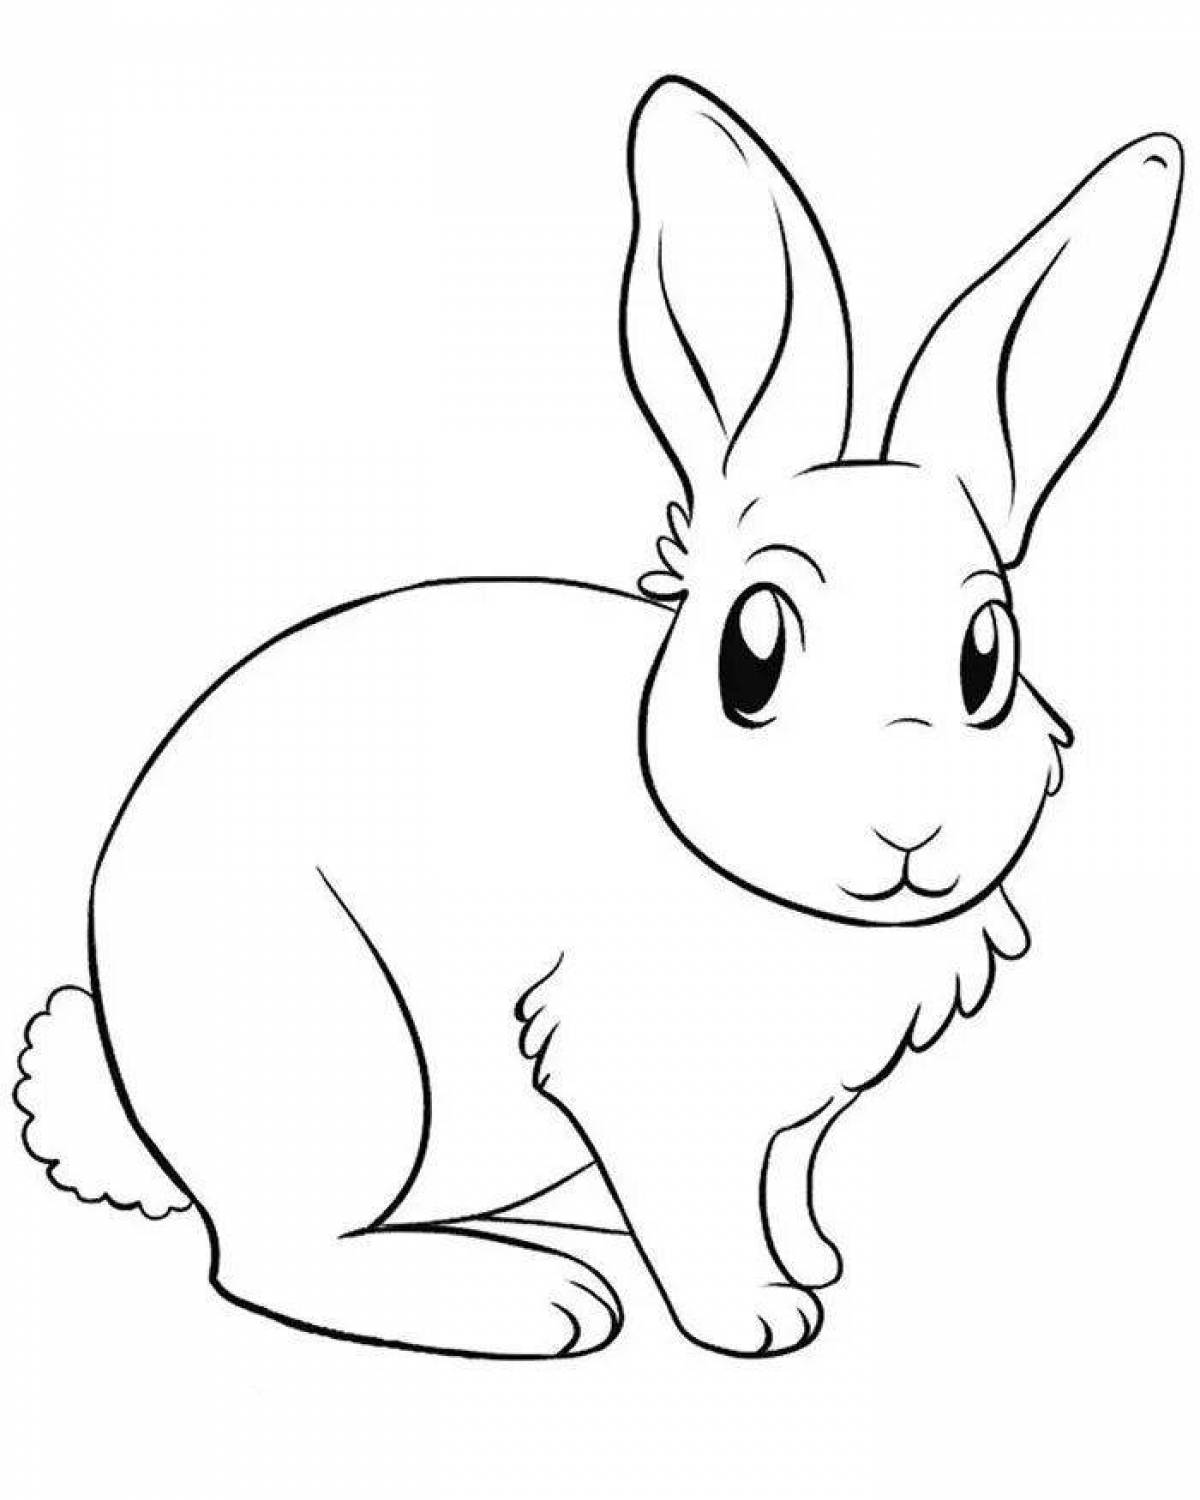 Delightful drawing of a hare